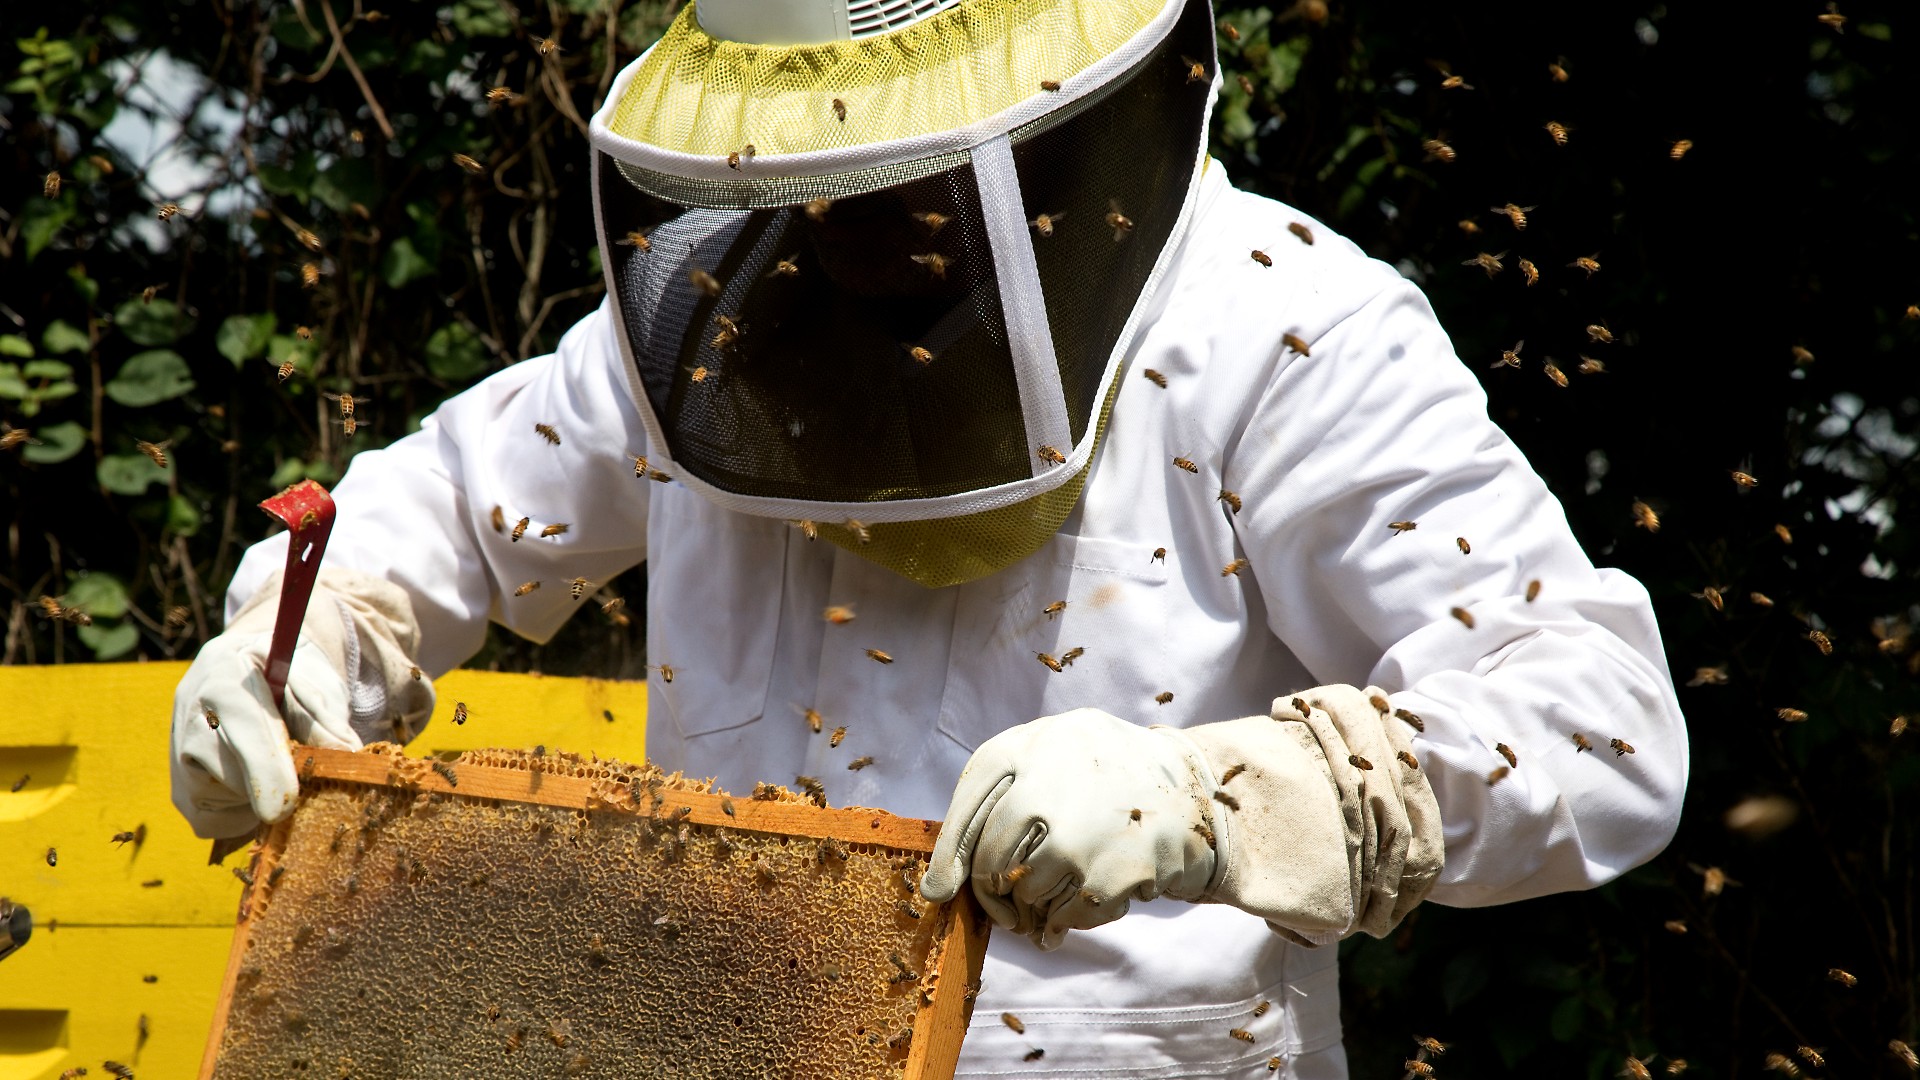 Here we see a beekeeper wearing a protective white bee suit. They are holding a honeycomb in front of them, whilst surrounding by a swarm of bees.